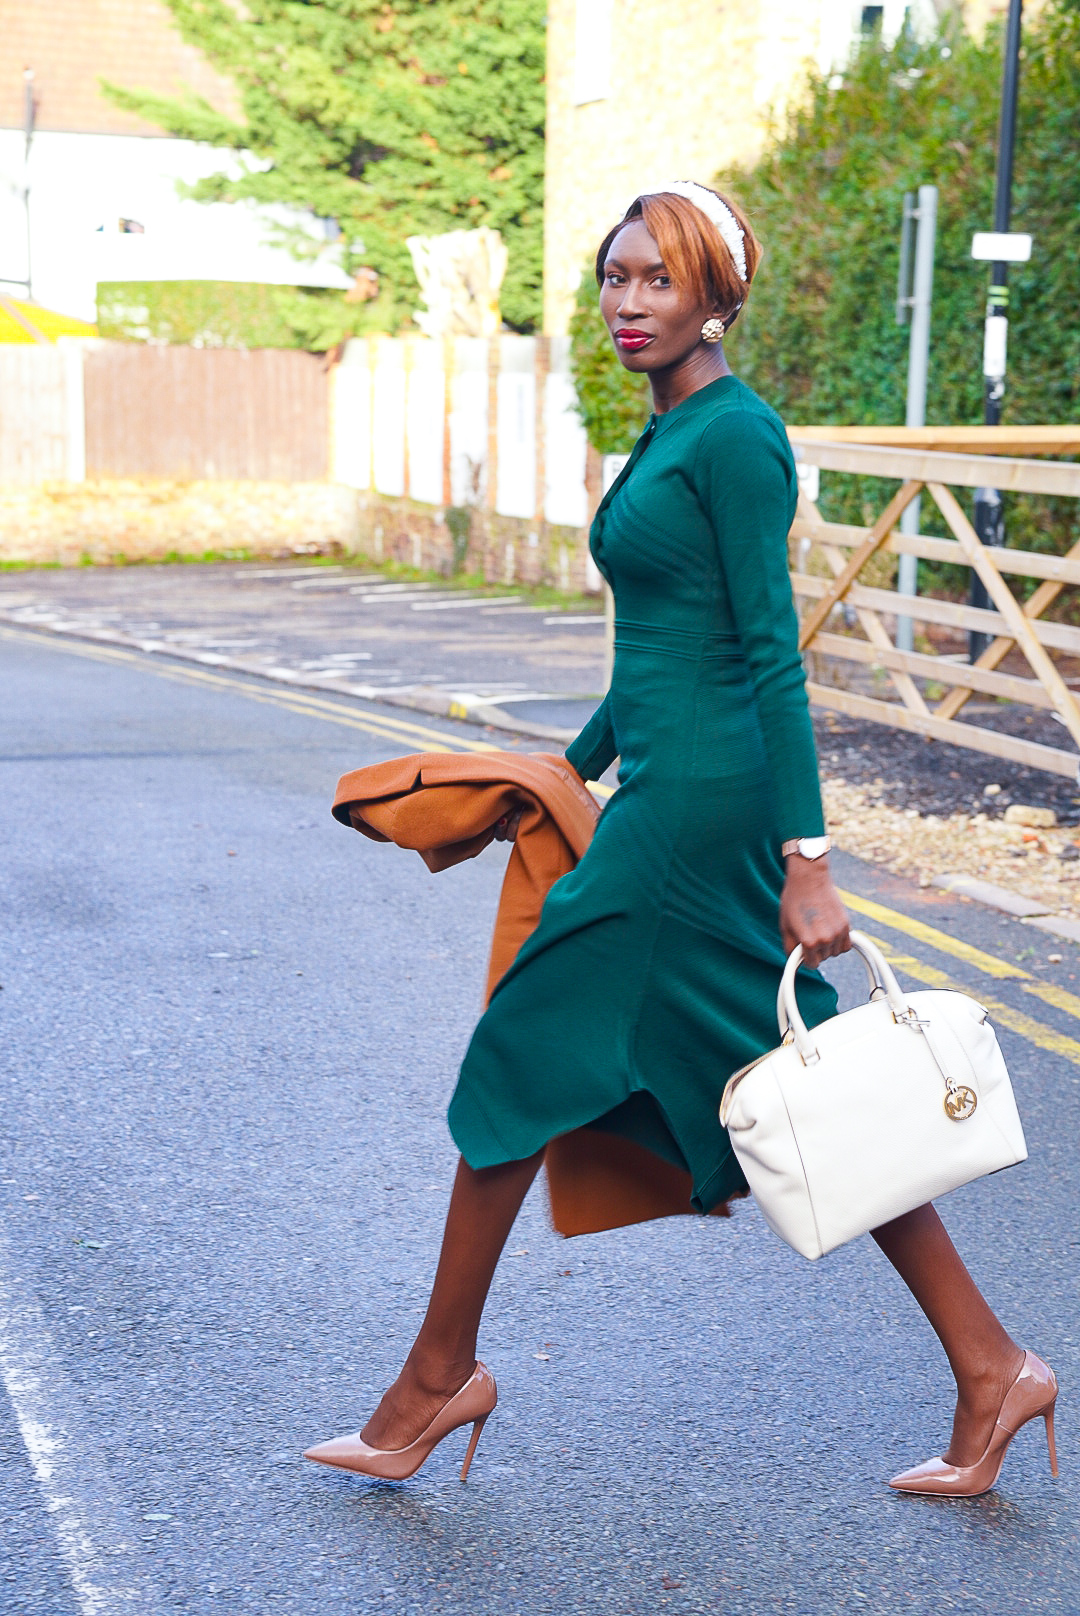 Green + Tan - Have More Faith!
THATCORPORATECHIC
WORKWEAR
CHURCH STYLE
HOW TO WEAR  GREEN AND TAN